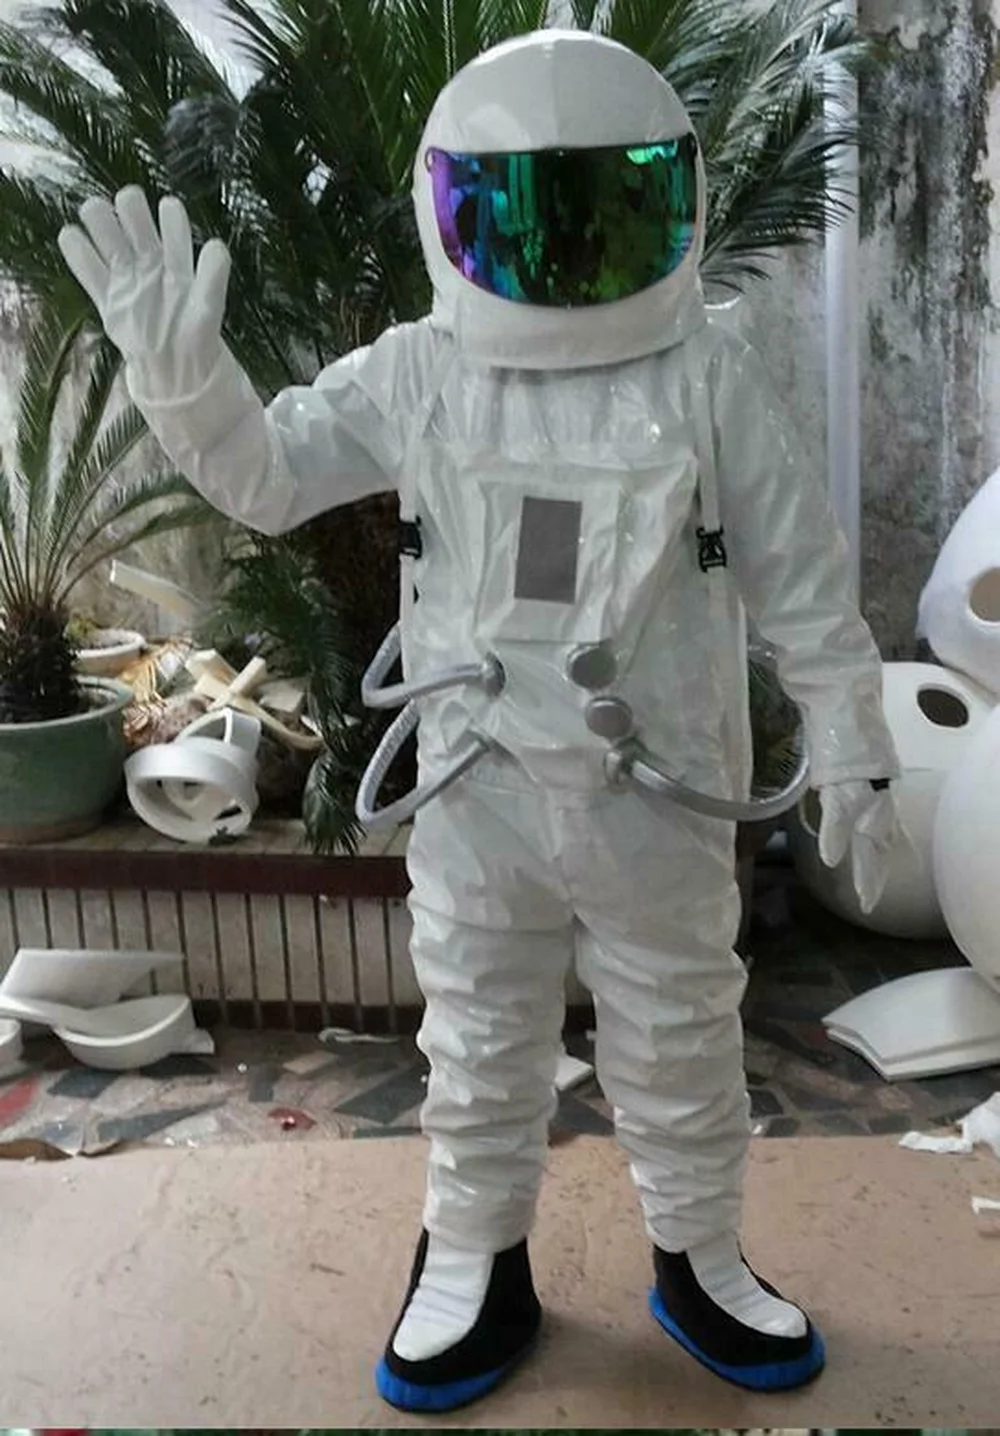 

2019 Spaceman Mascot Costume Suits Fancy Party Adult Size Dress Astronaut New Clothing Advertising Carnival Halloween Christmas